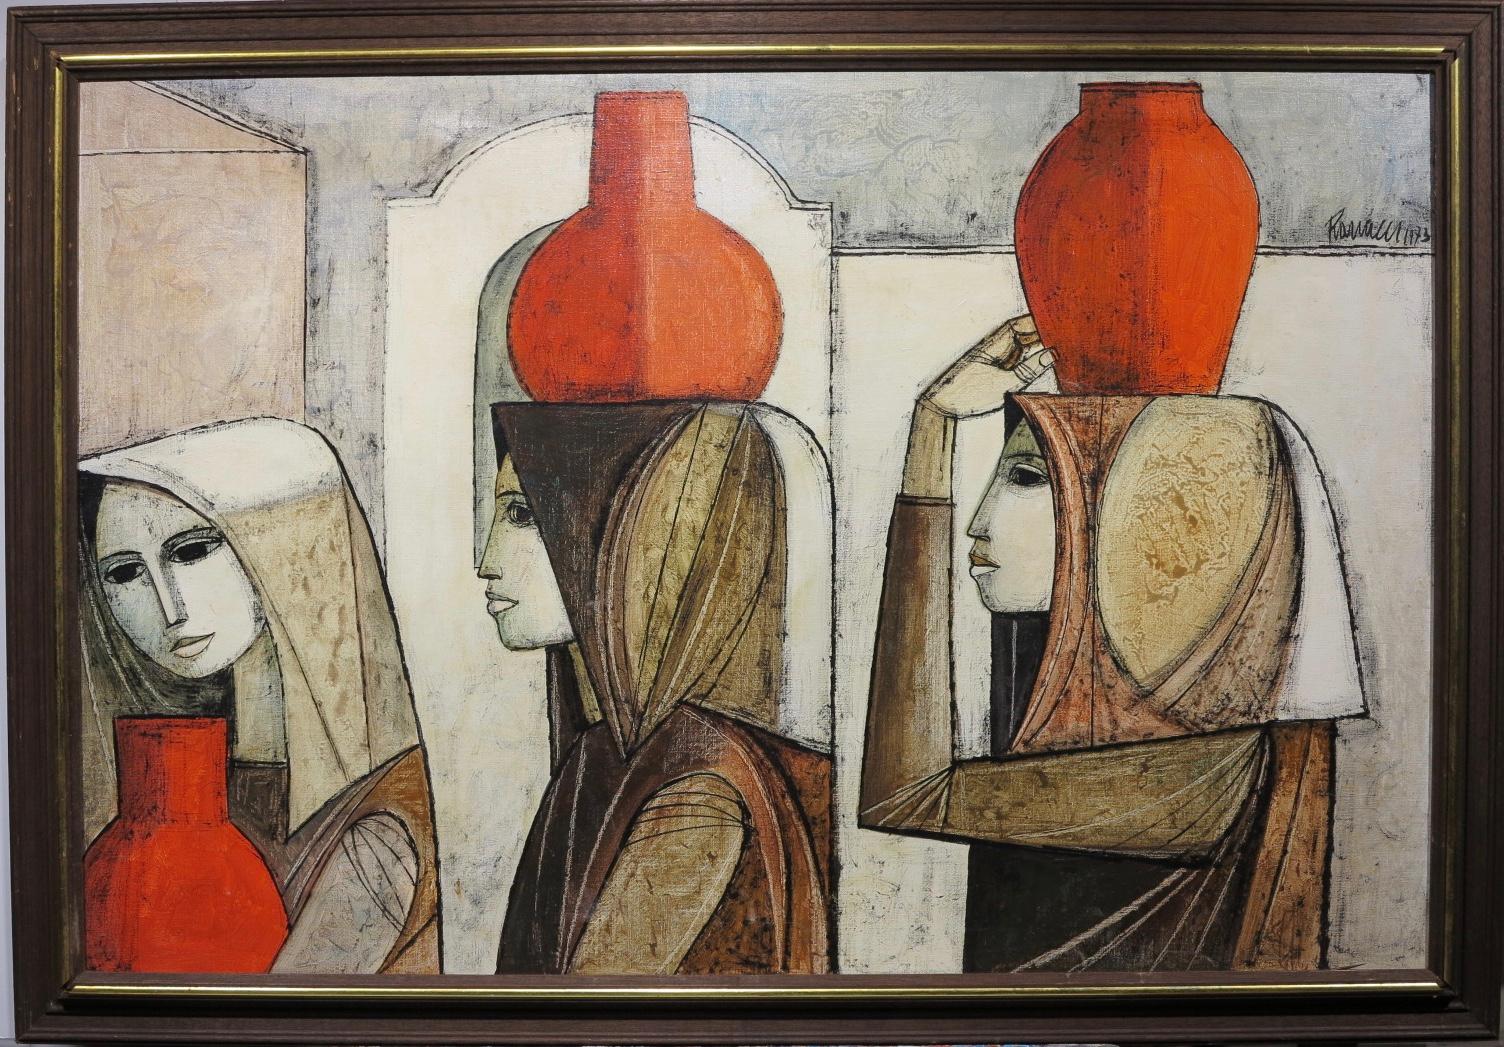 Three Figures (Italian peasant women abstract cubist painting) - Painting by Lucio Ranucci